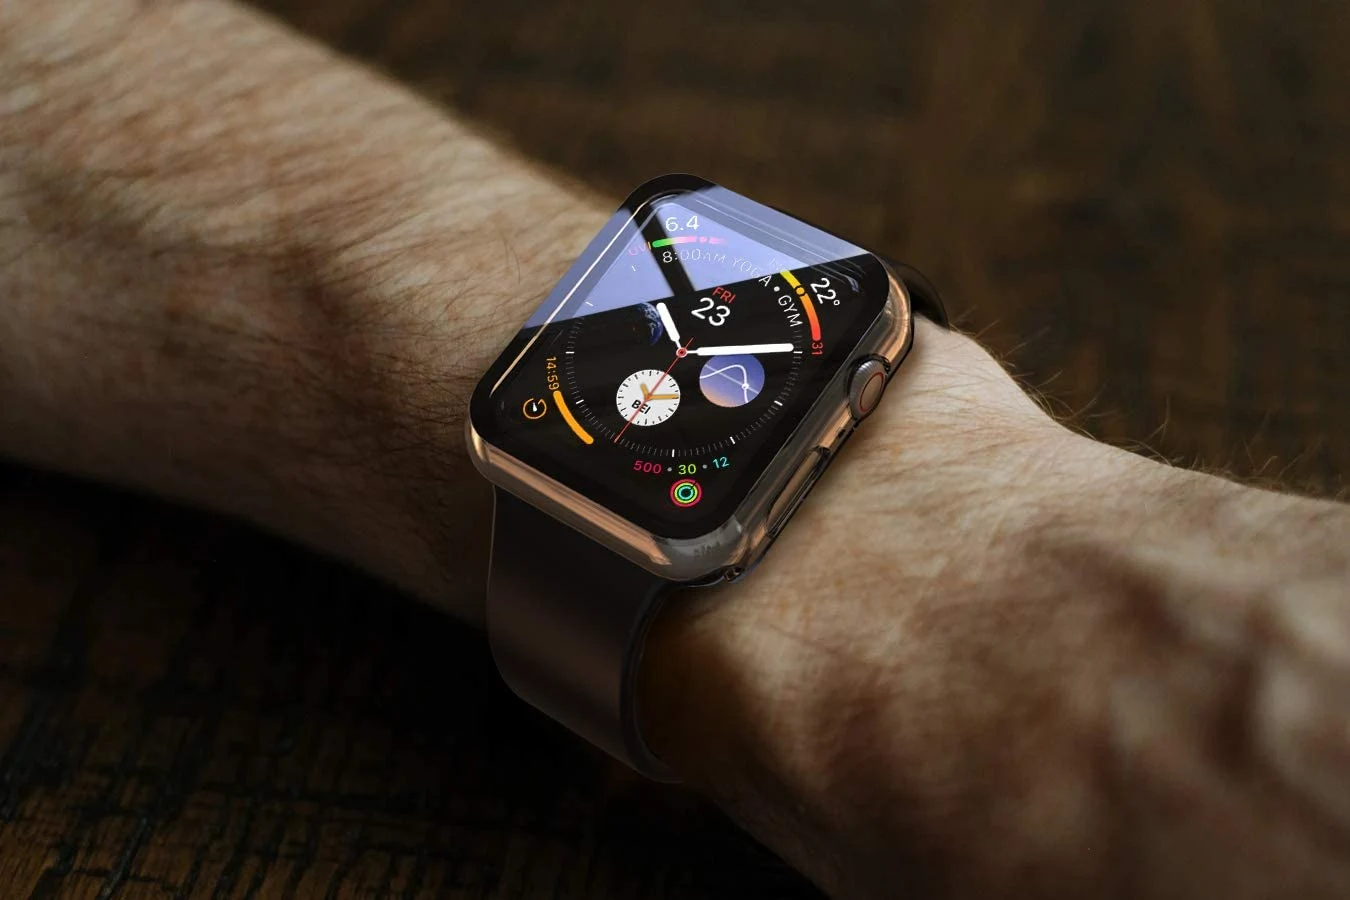 Screen Protector on Apple Watch